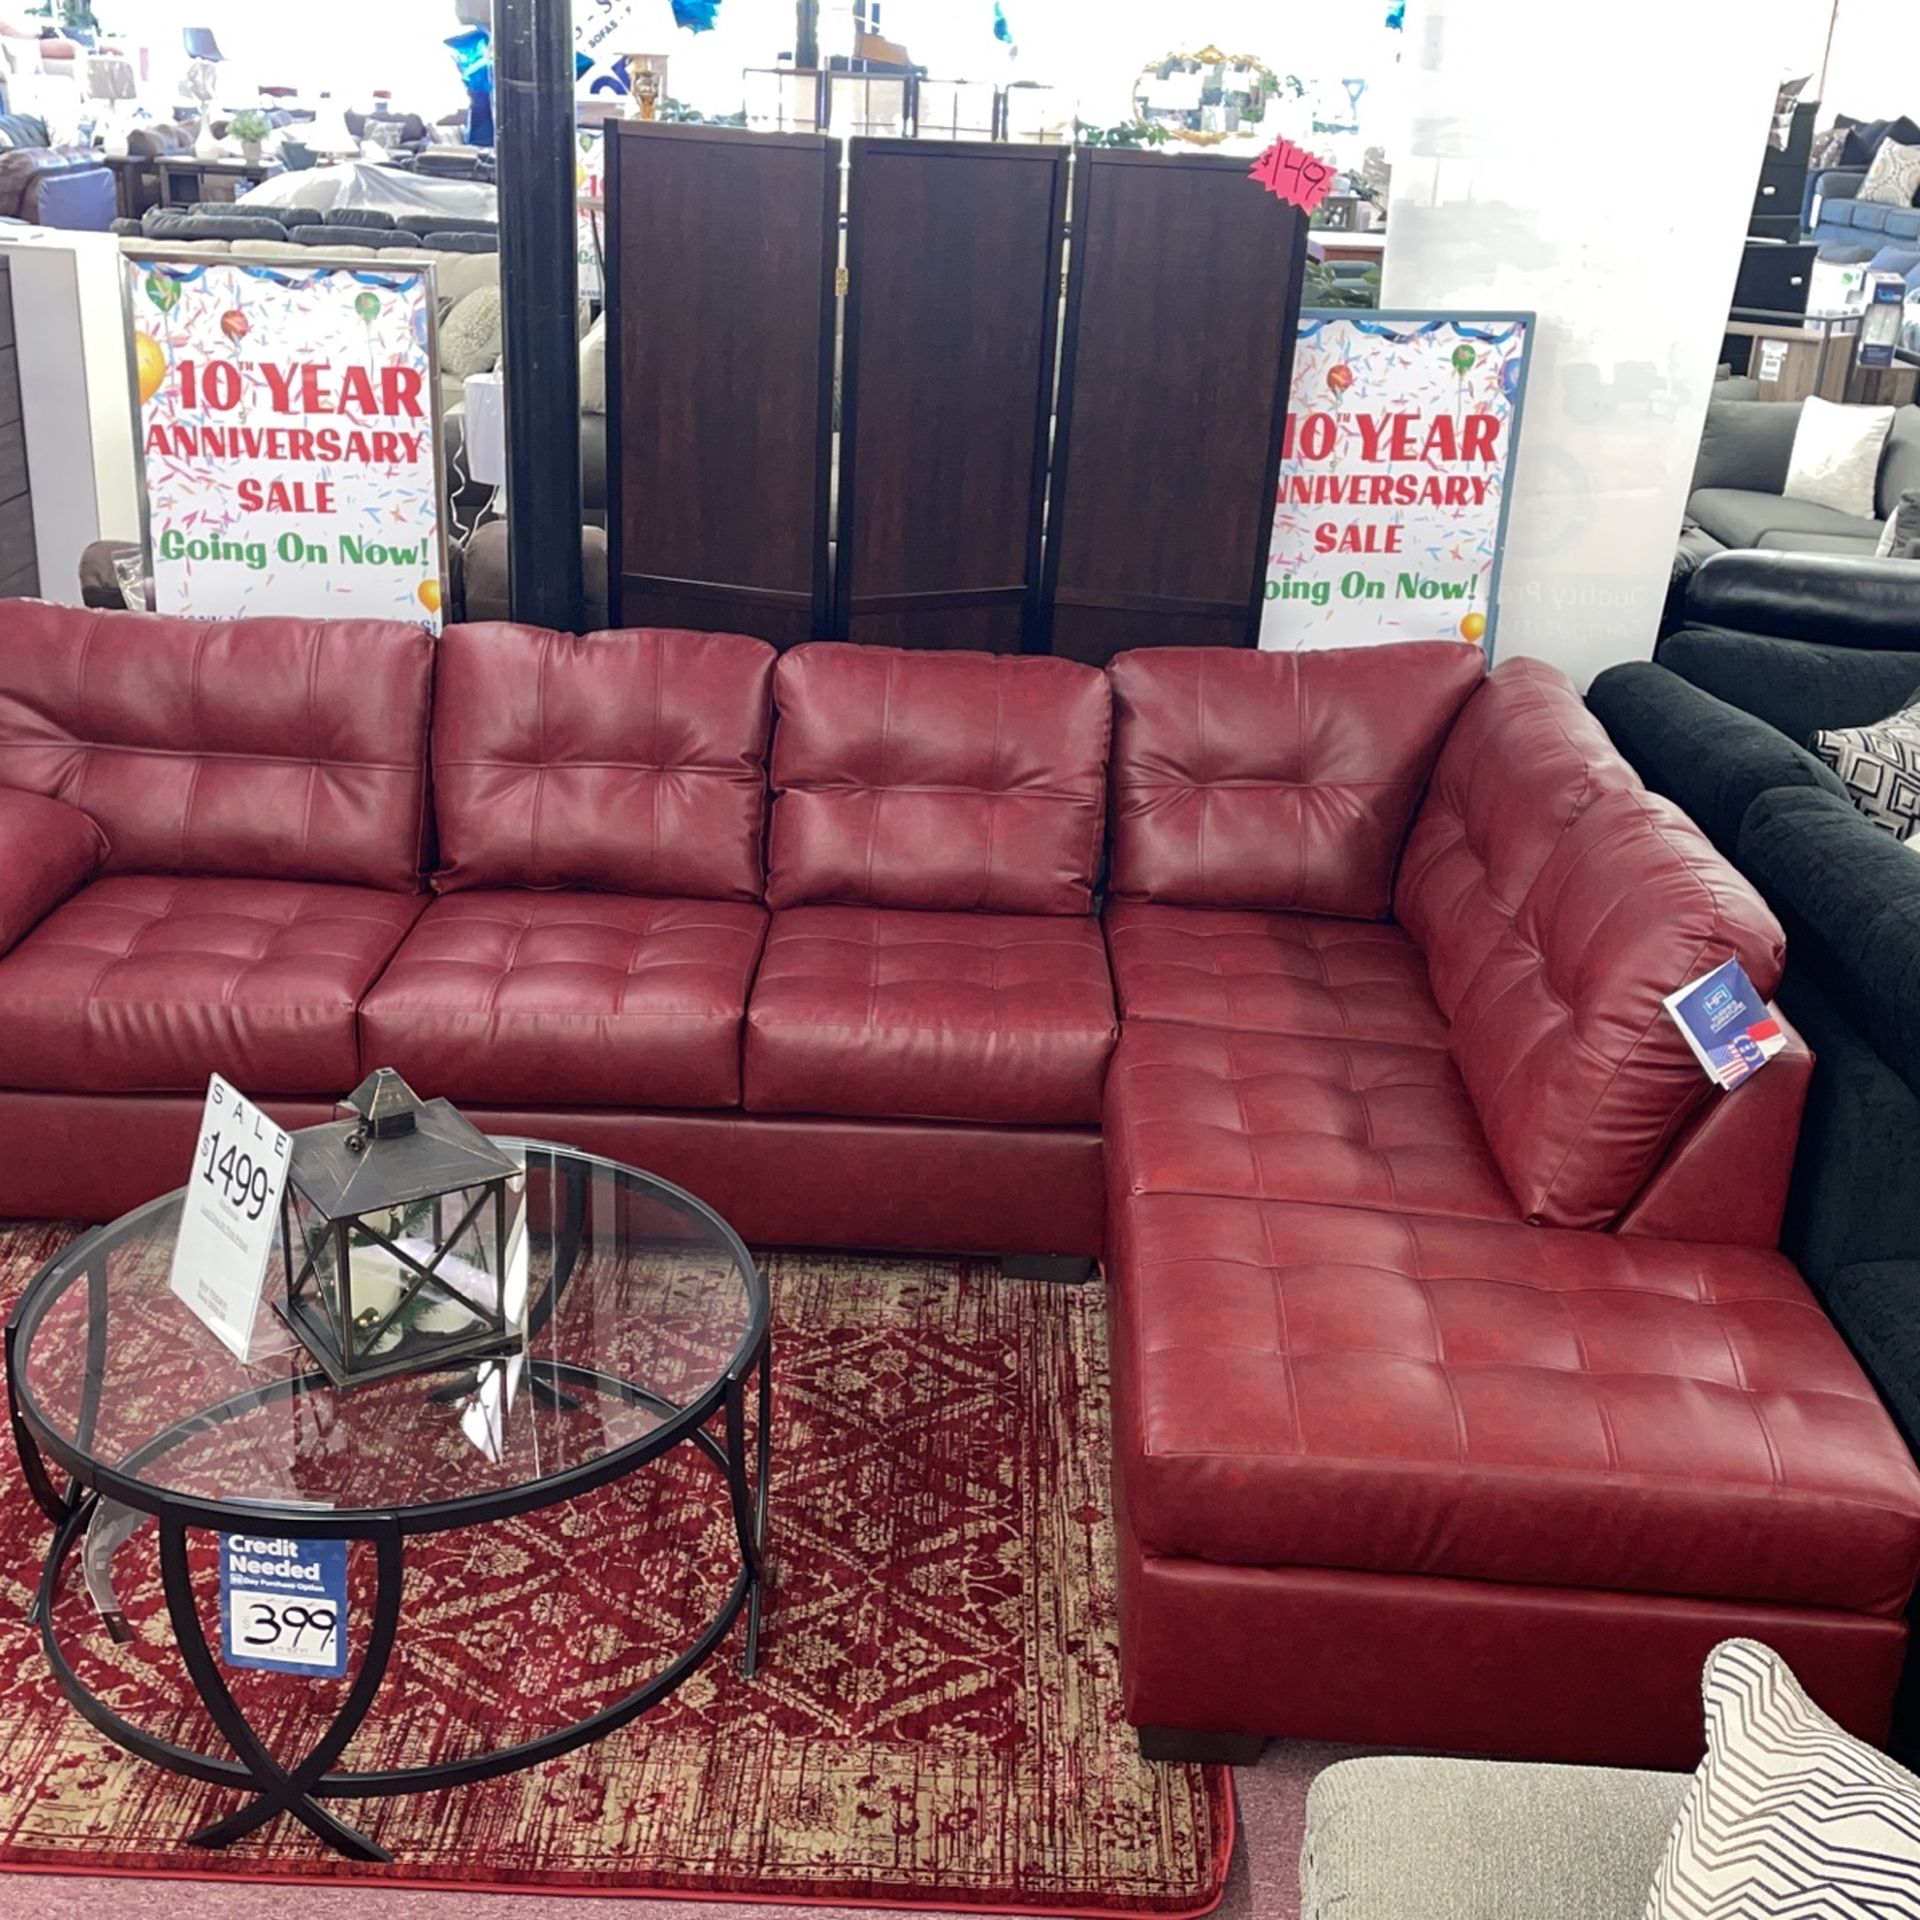 🇺🇸HUGE Blowout Furniture Sale!🇺🇸 Brand New Faux Leather Red Sectional! $50 Down Takes It Home Today!